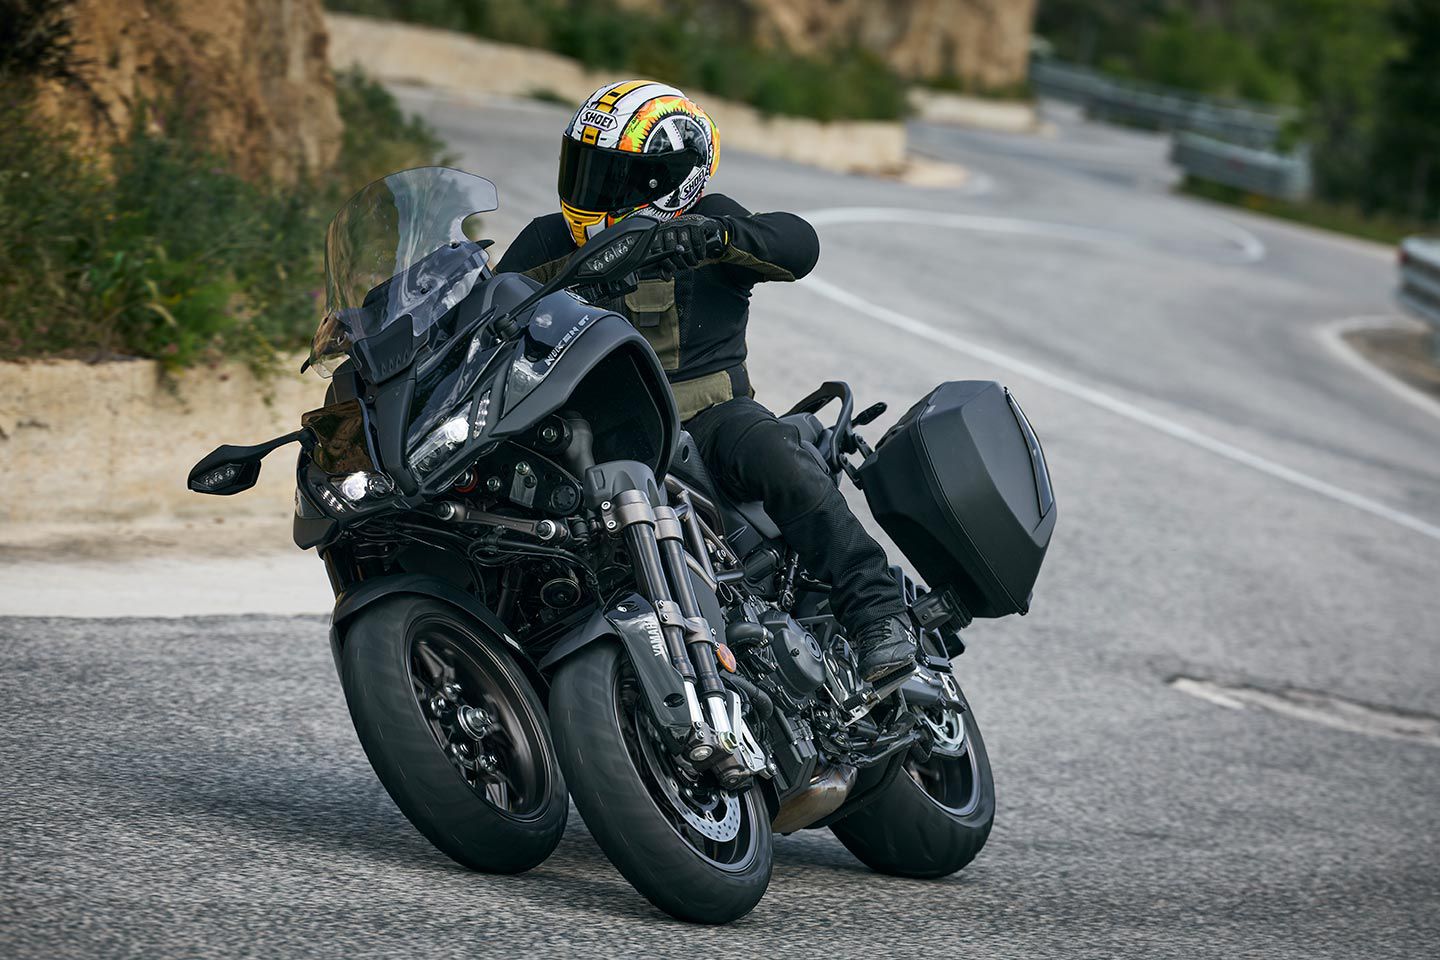 Yamaha’s second-generation quickshifter is now standard, working on both up- and downshifts.